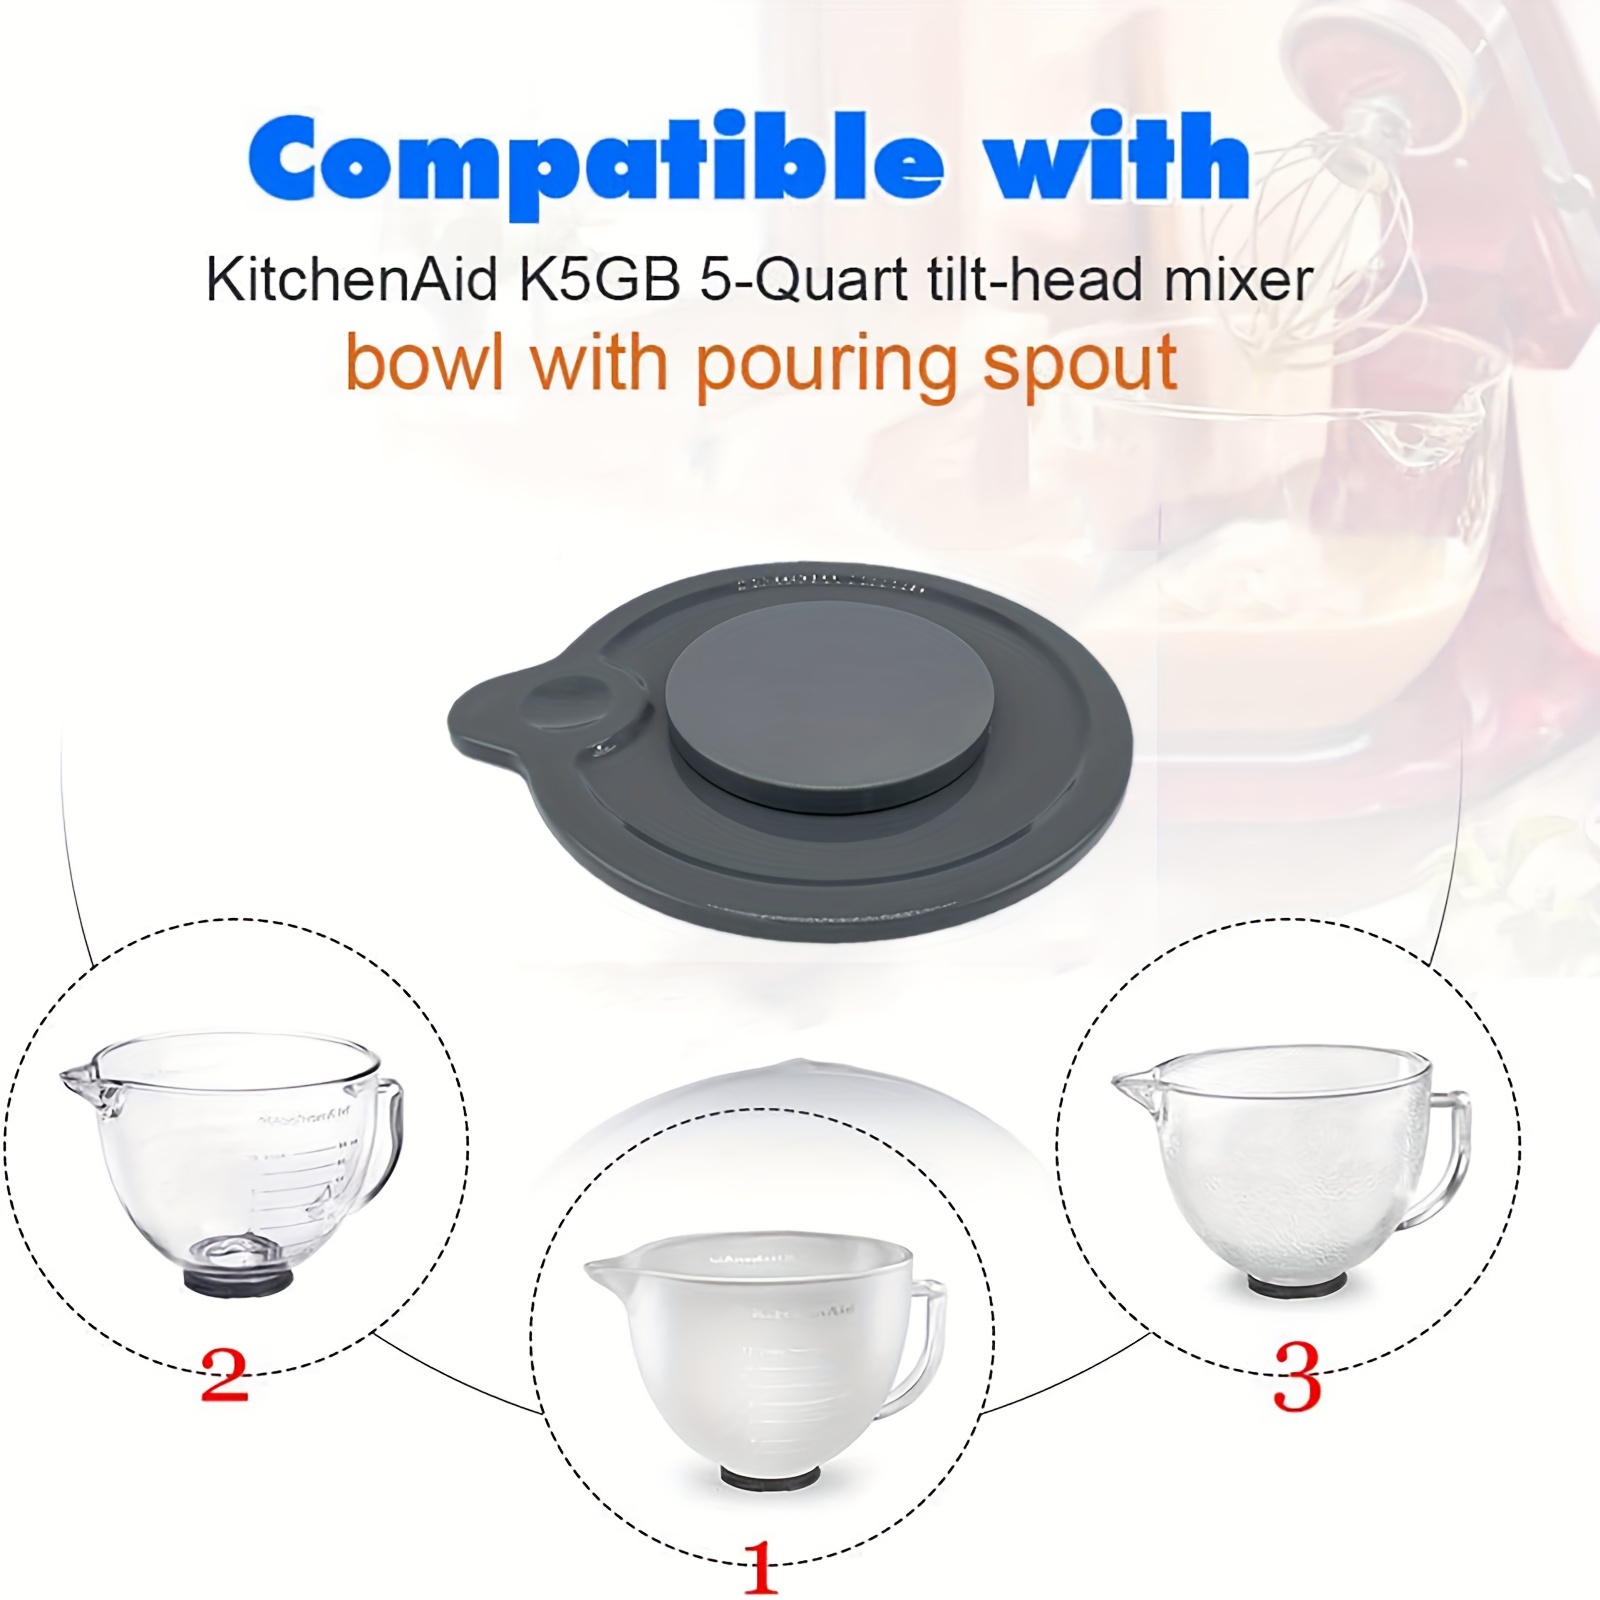 1pc, Mixer Bowl Cover For KitchenAid 4.5-5 Quart Tilt-Head Stand Mixer,  Splash Guard With Add Ingredient Opening, Glass Bowl Lid To Prevent  Ingredien